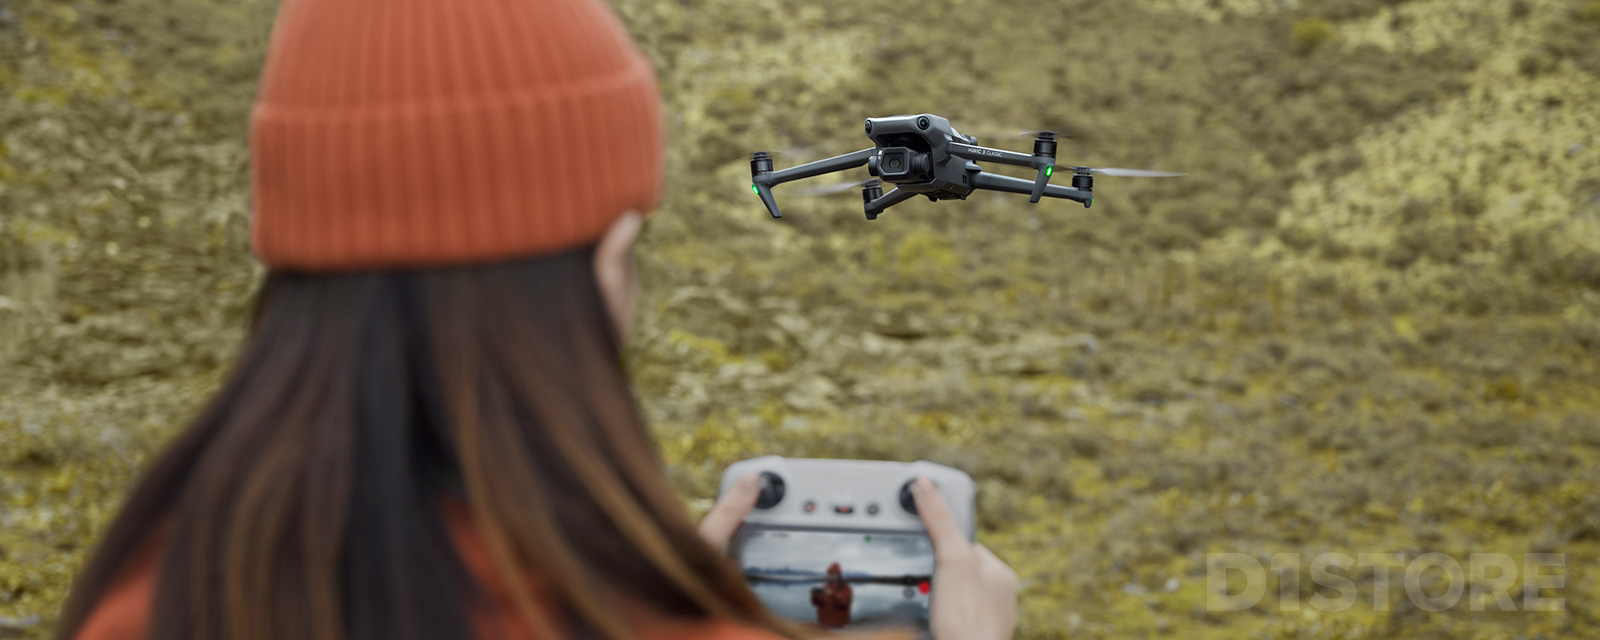 DJI RC Now Compatible With DJI Air 2S | D1 Lounge